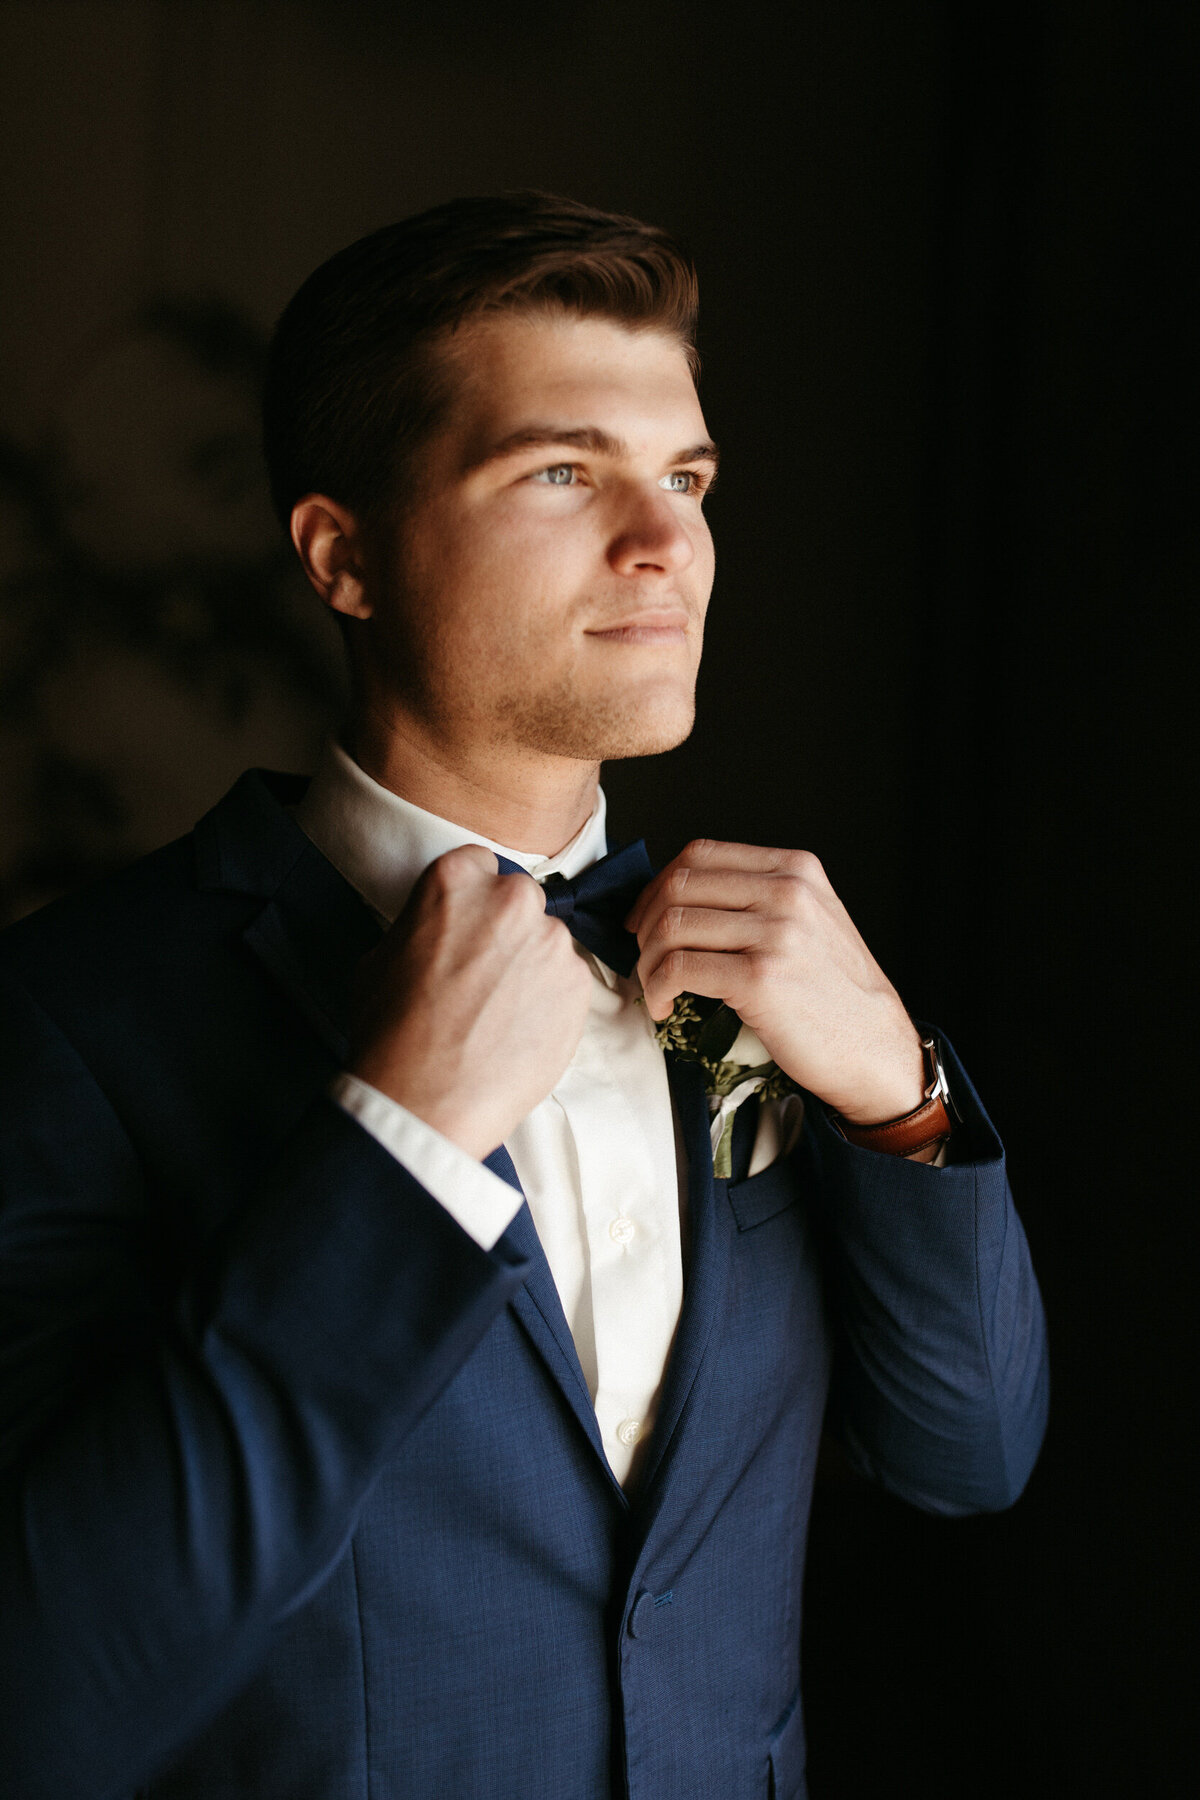 Groom in blue suit getting ready in front of window on his wedding day